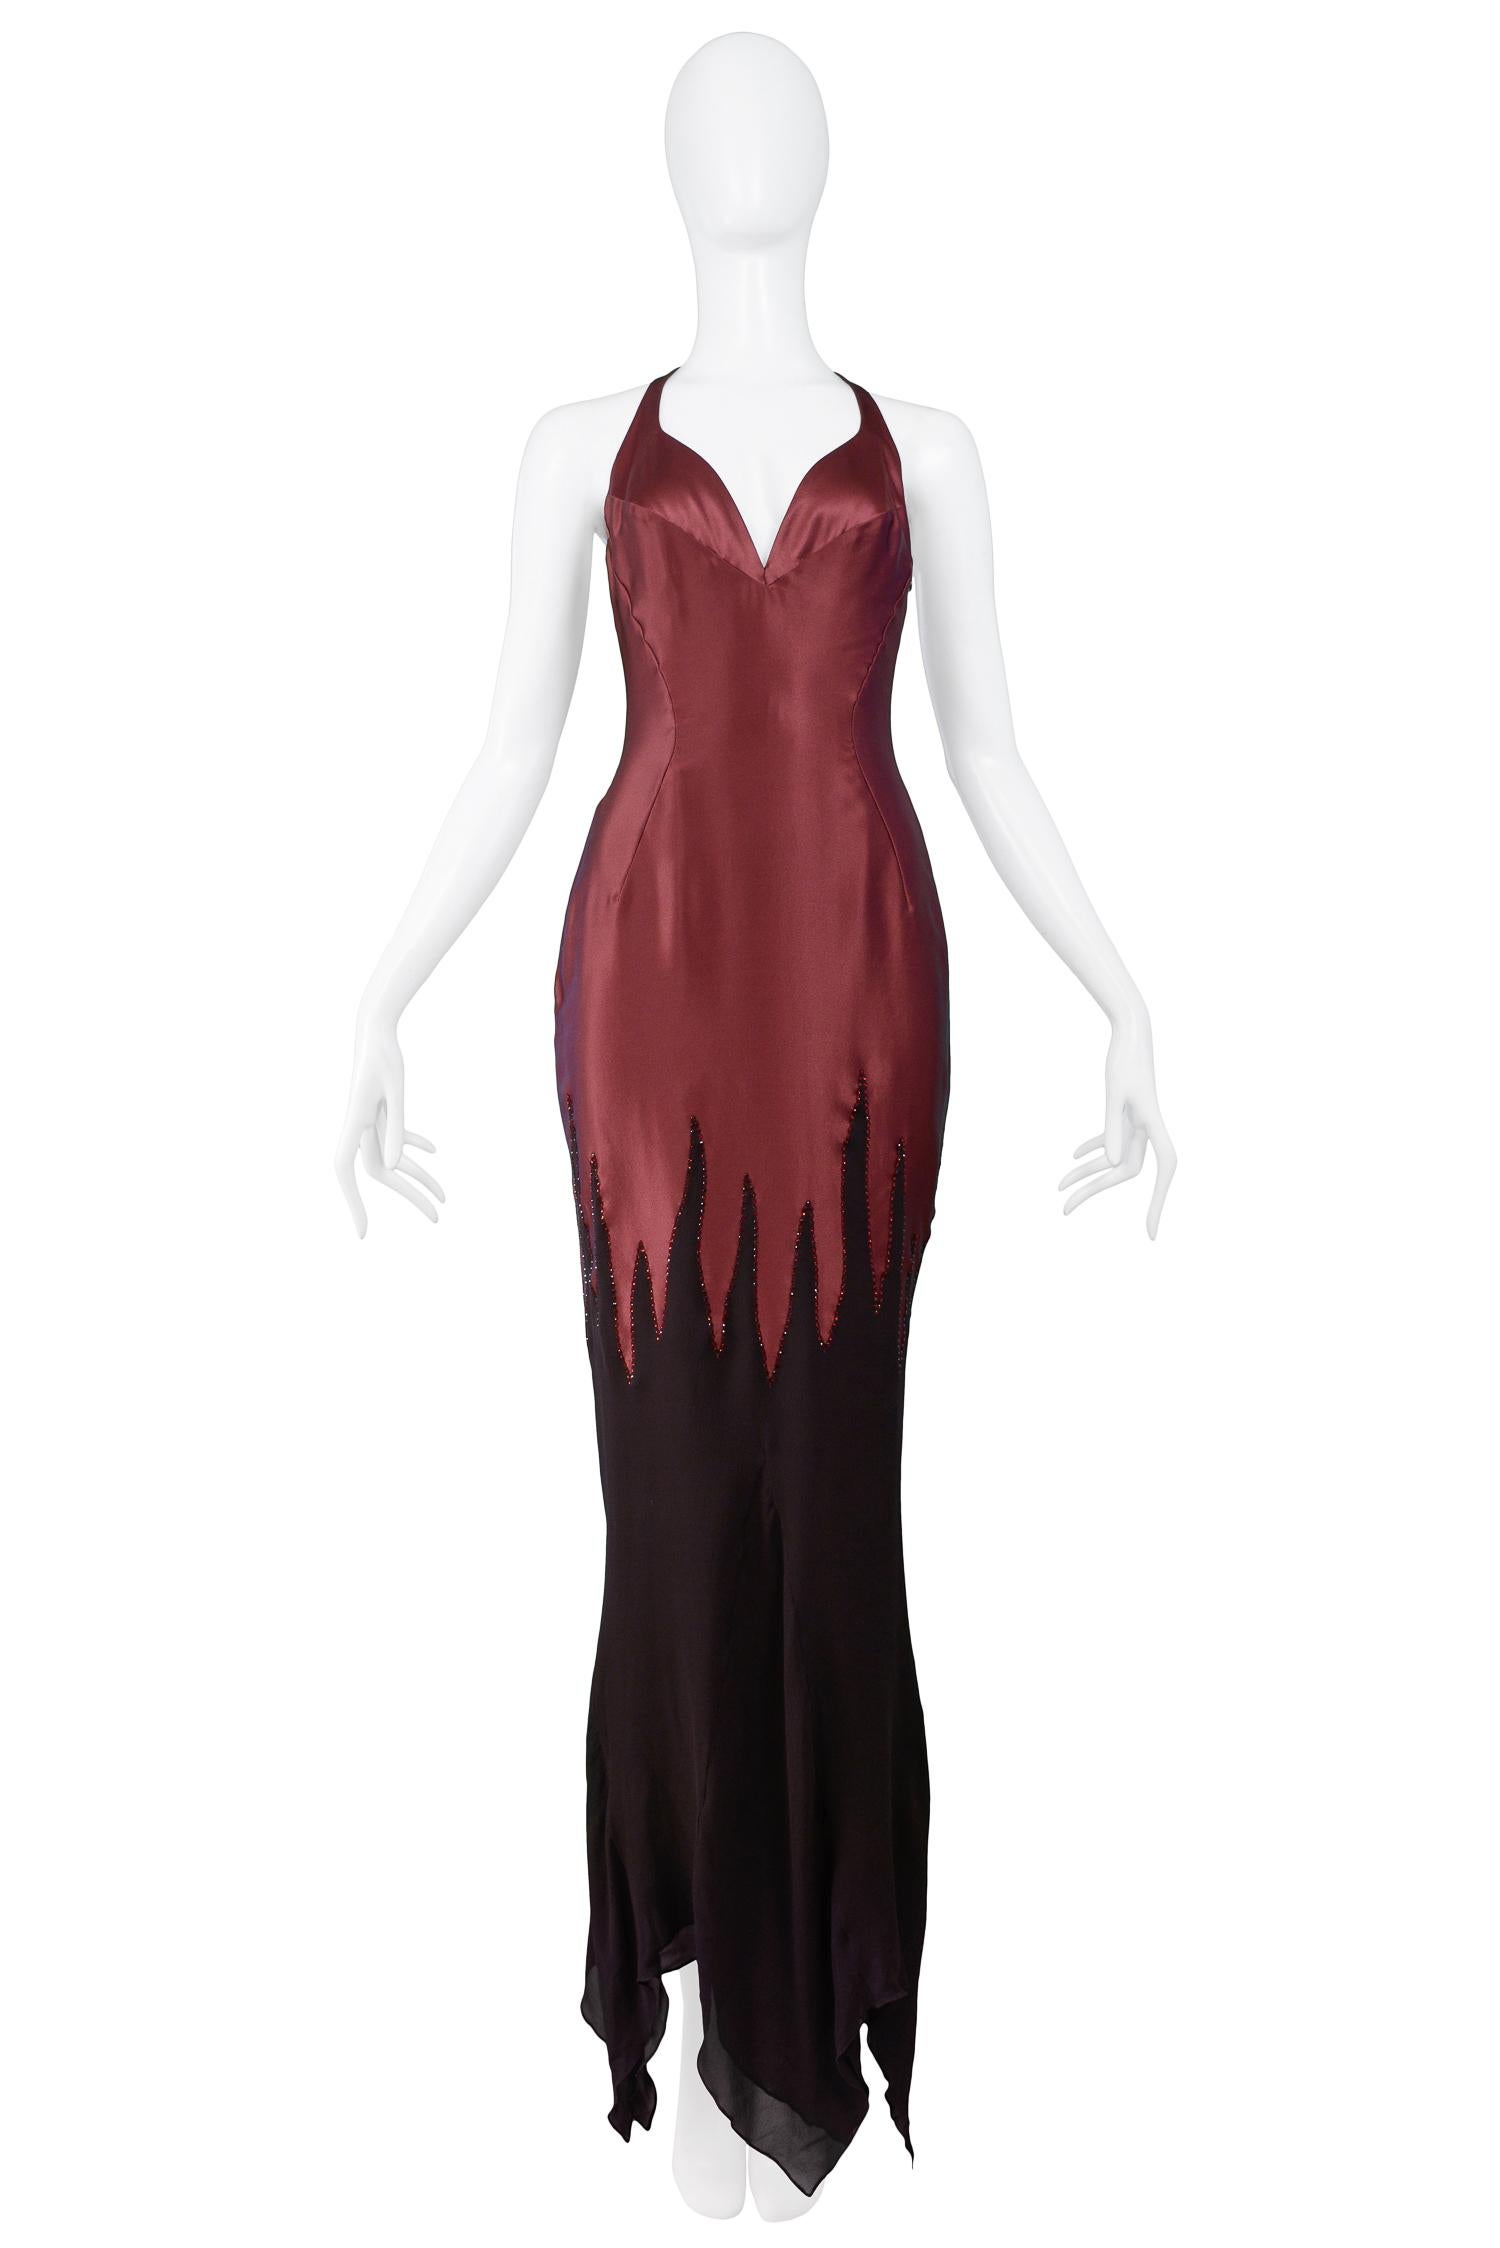 Vintage Thierry Mugler burgundy silk charmeuse gown featuring a fitted bodice with curved v-neck, low back with t-strap, and aubergine chiffon flame tip detail at skirt with glass beading and rhinestones. 

Excellent Condition.

Size: 40 